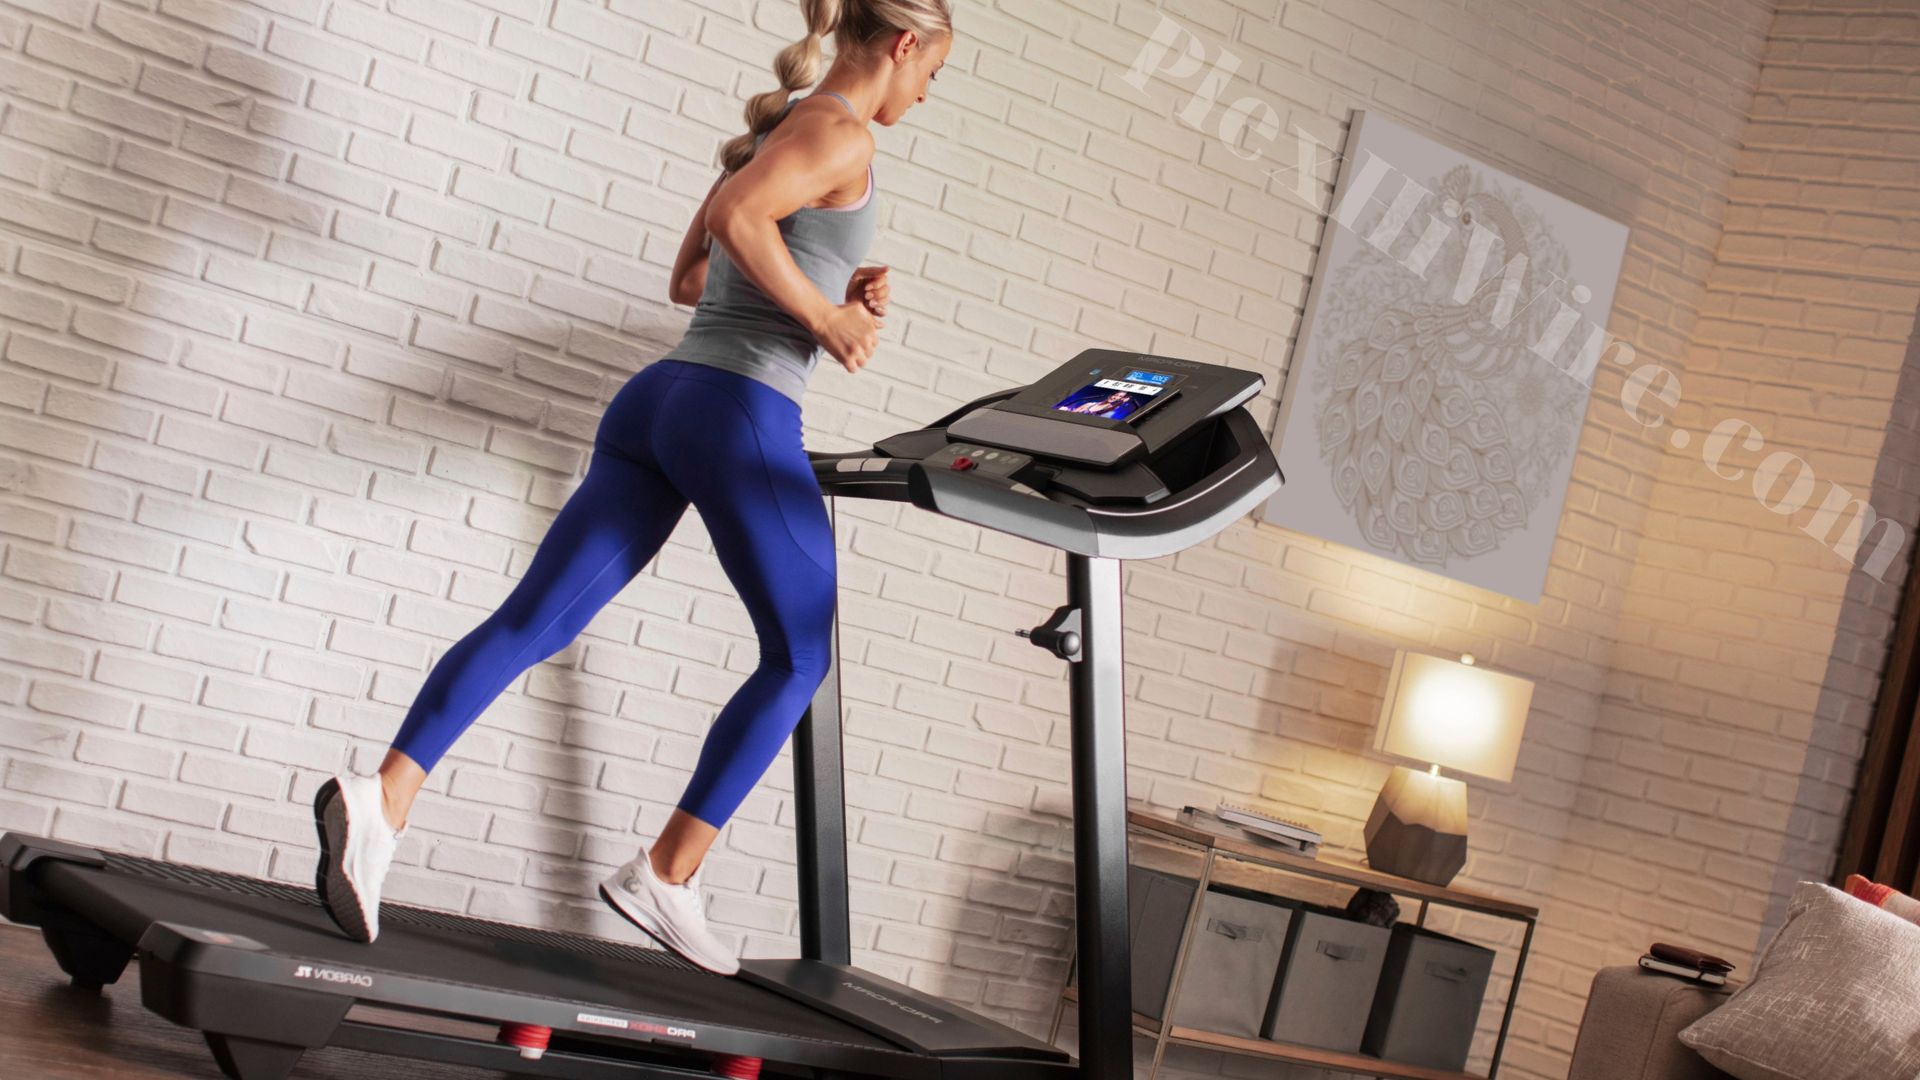 How Long Should I Use a Treadmill for The First Time?